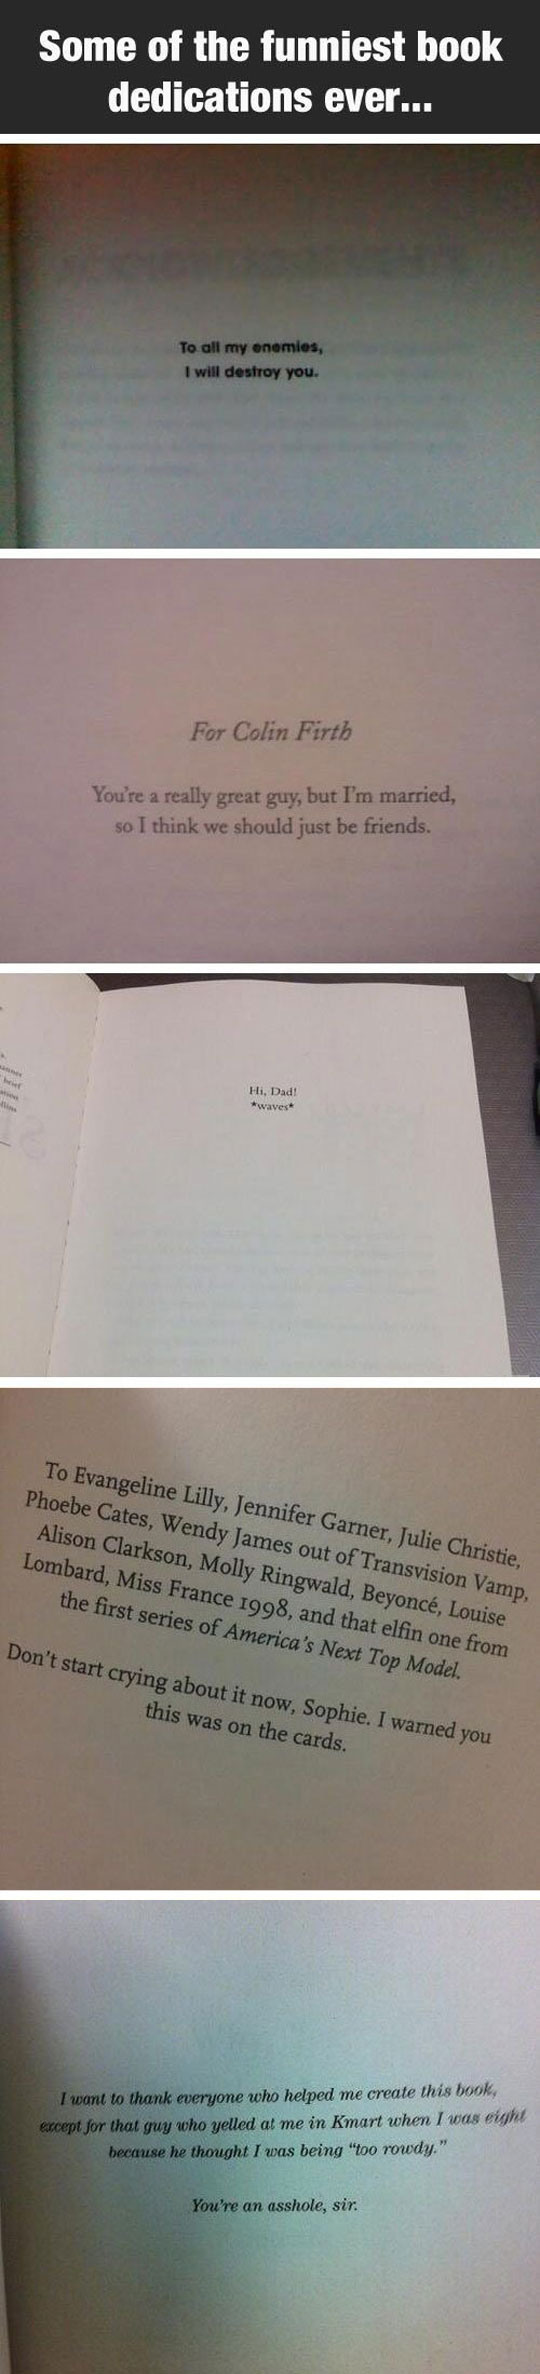 The Funniest Dedications